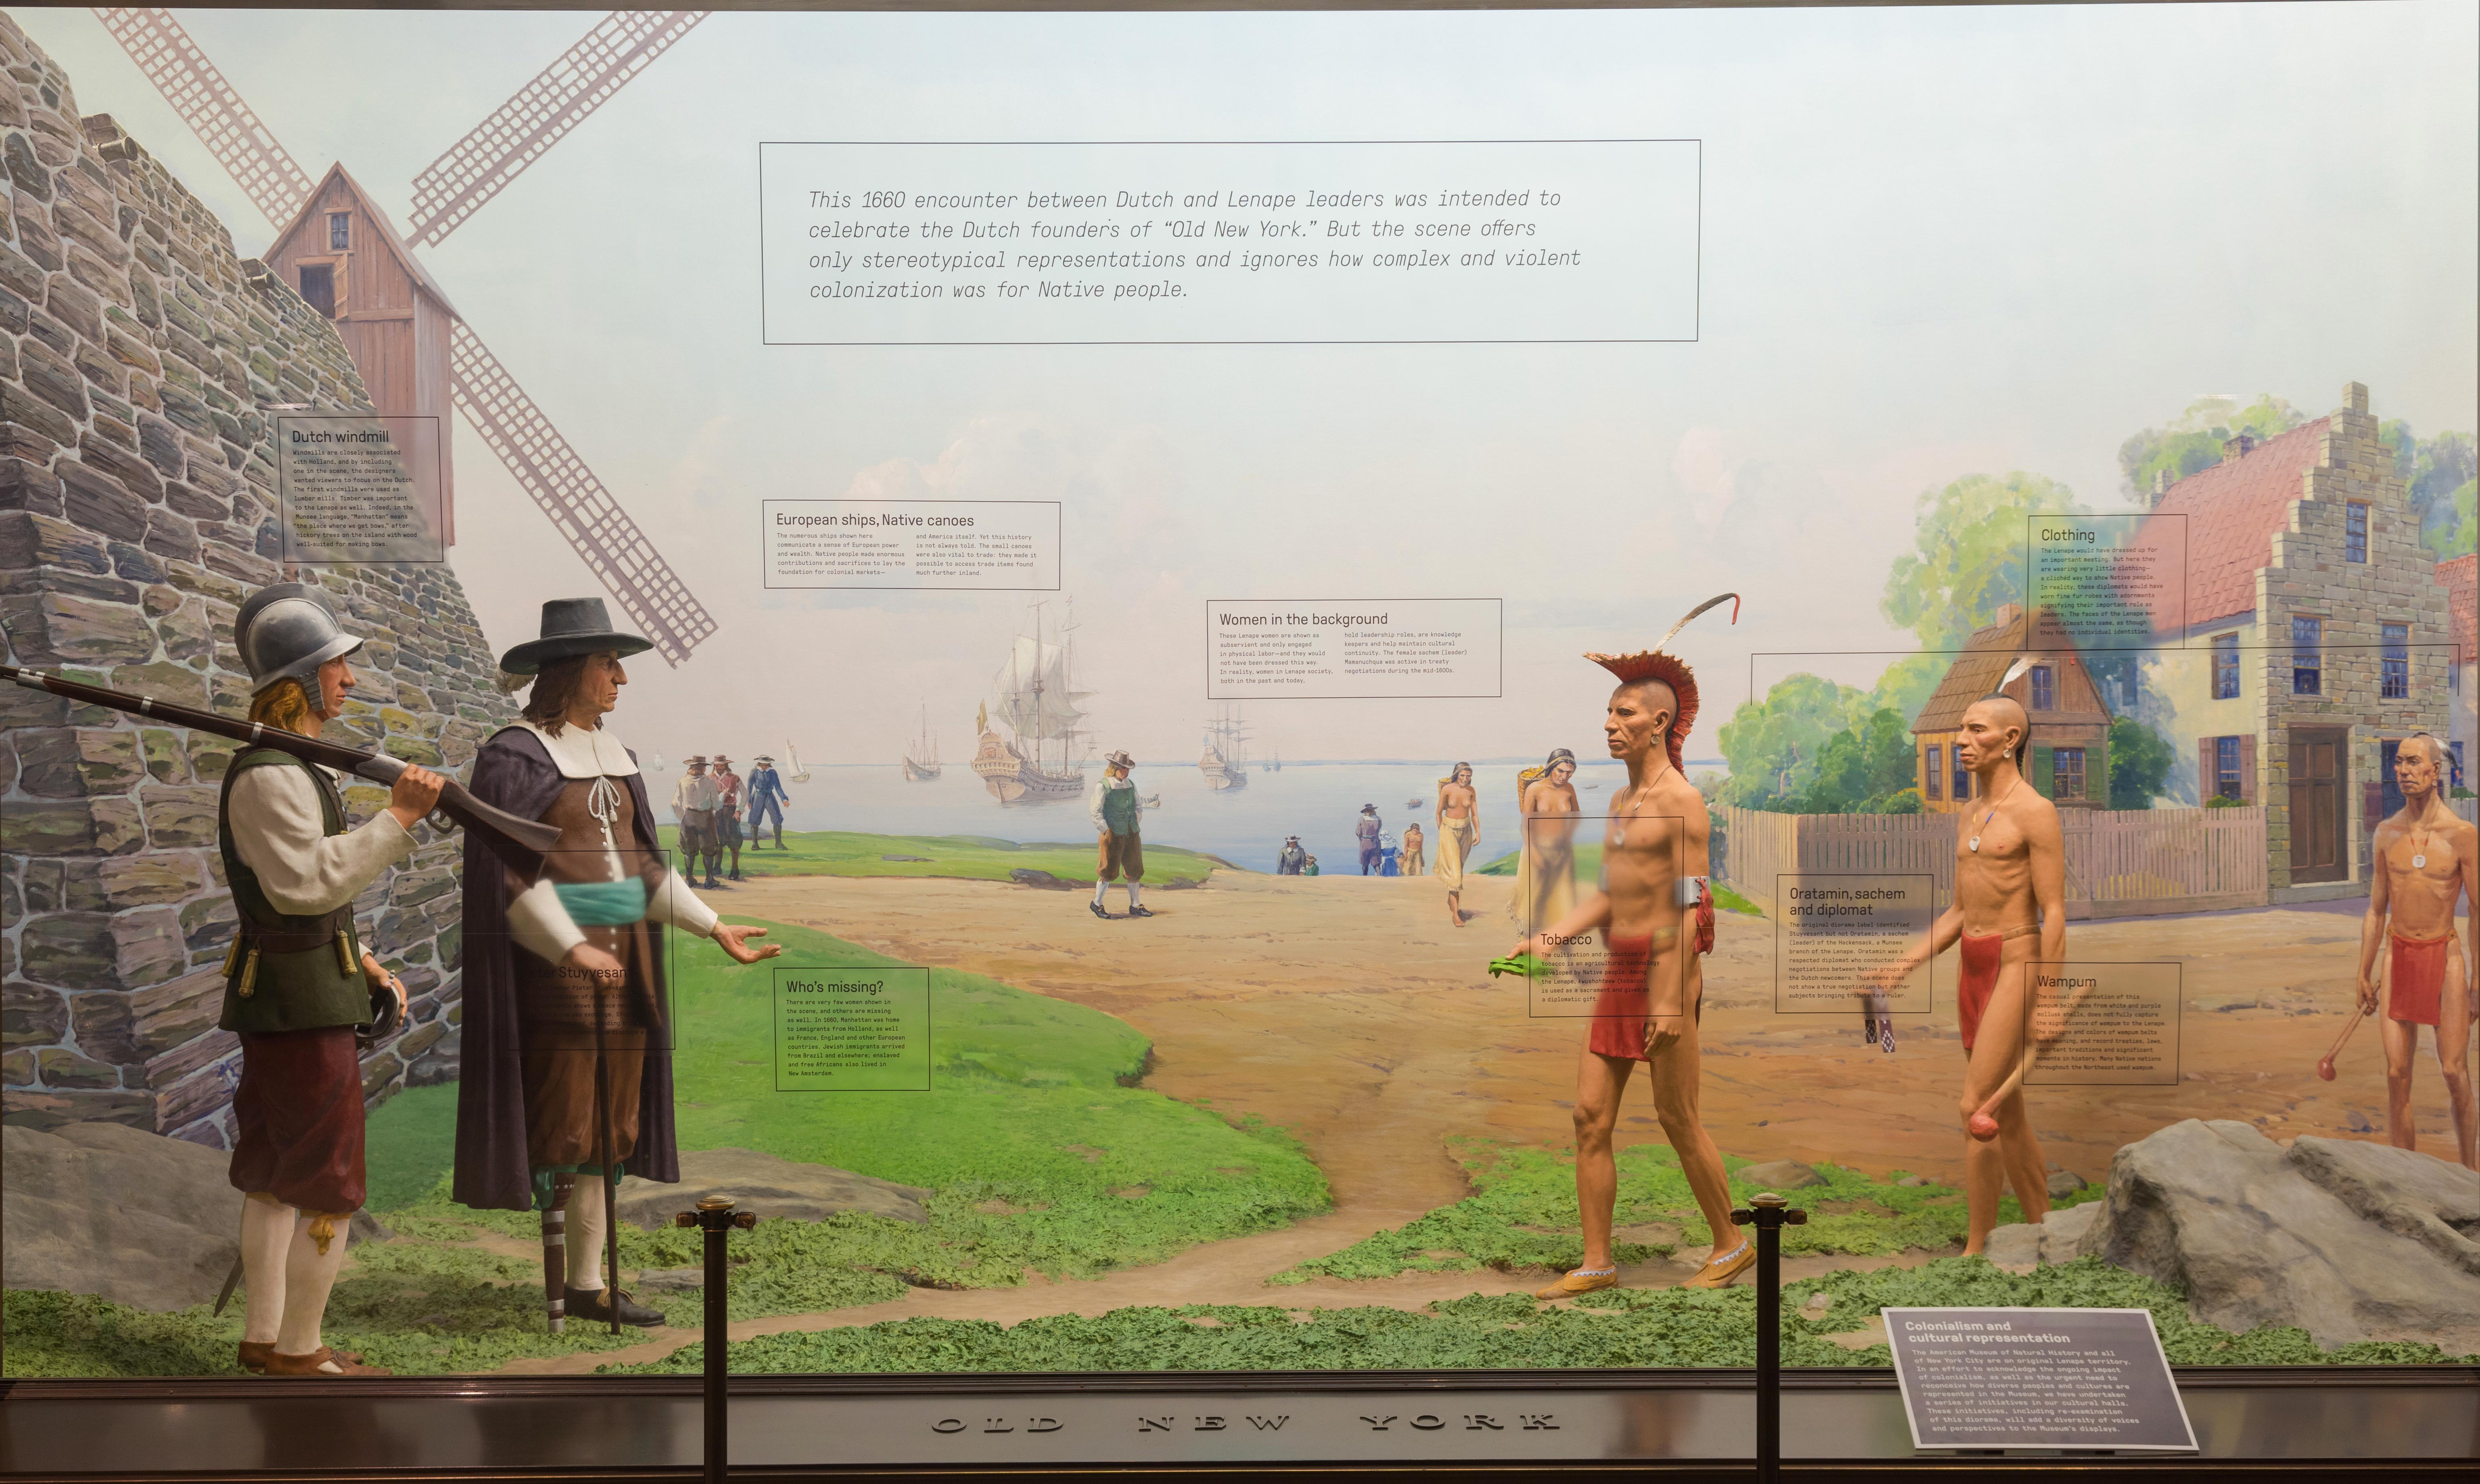 New interpretation on the glass of the 1936 Old New York diorama, which depicts a scene between the colonial Dutch and the Lenape.